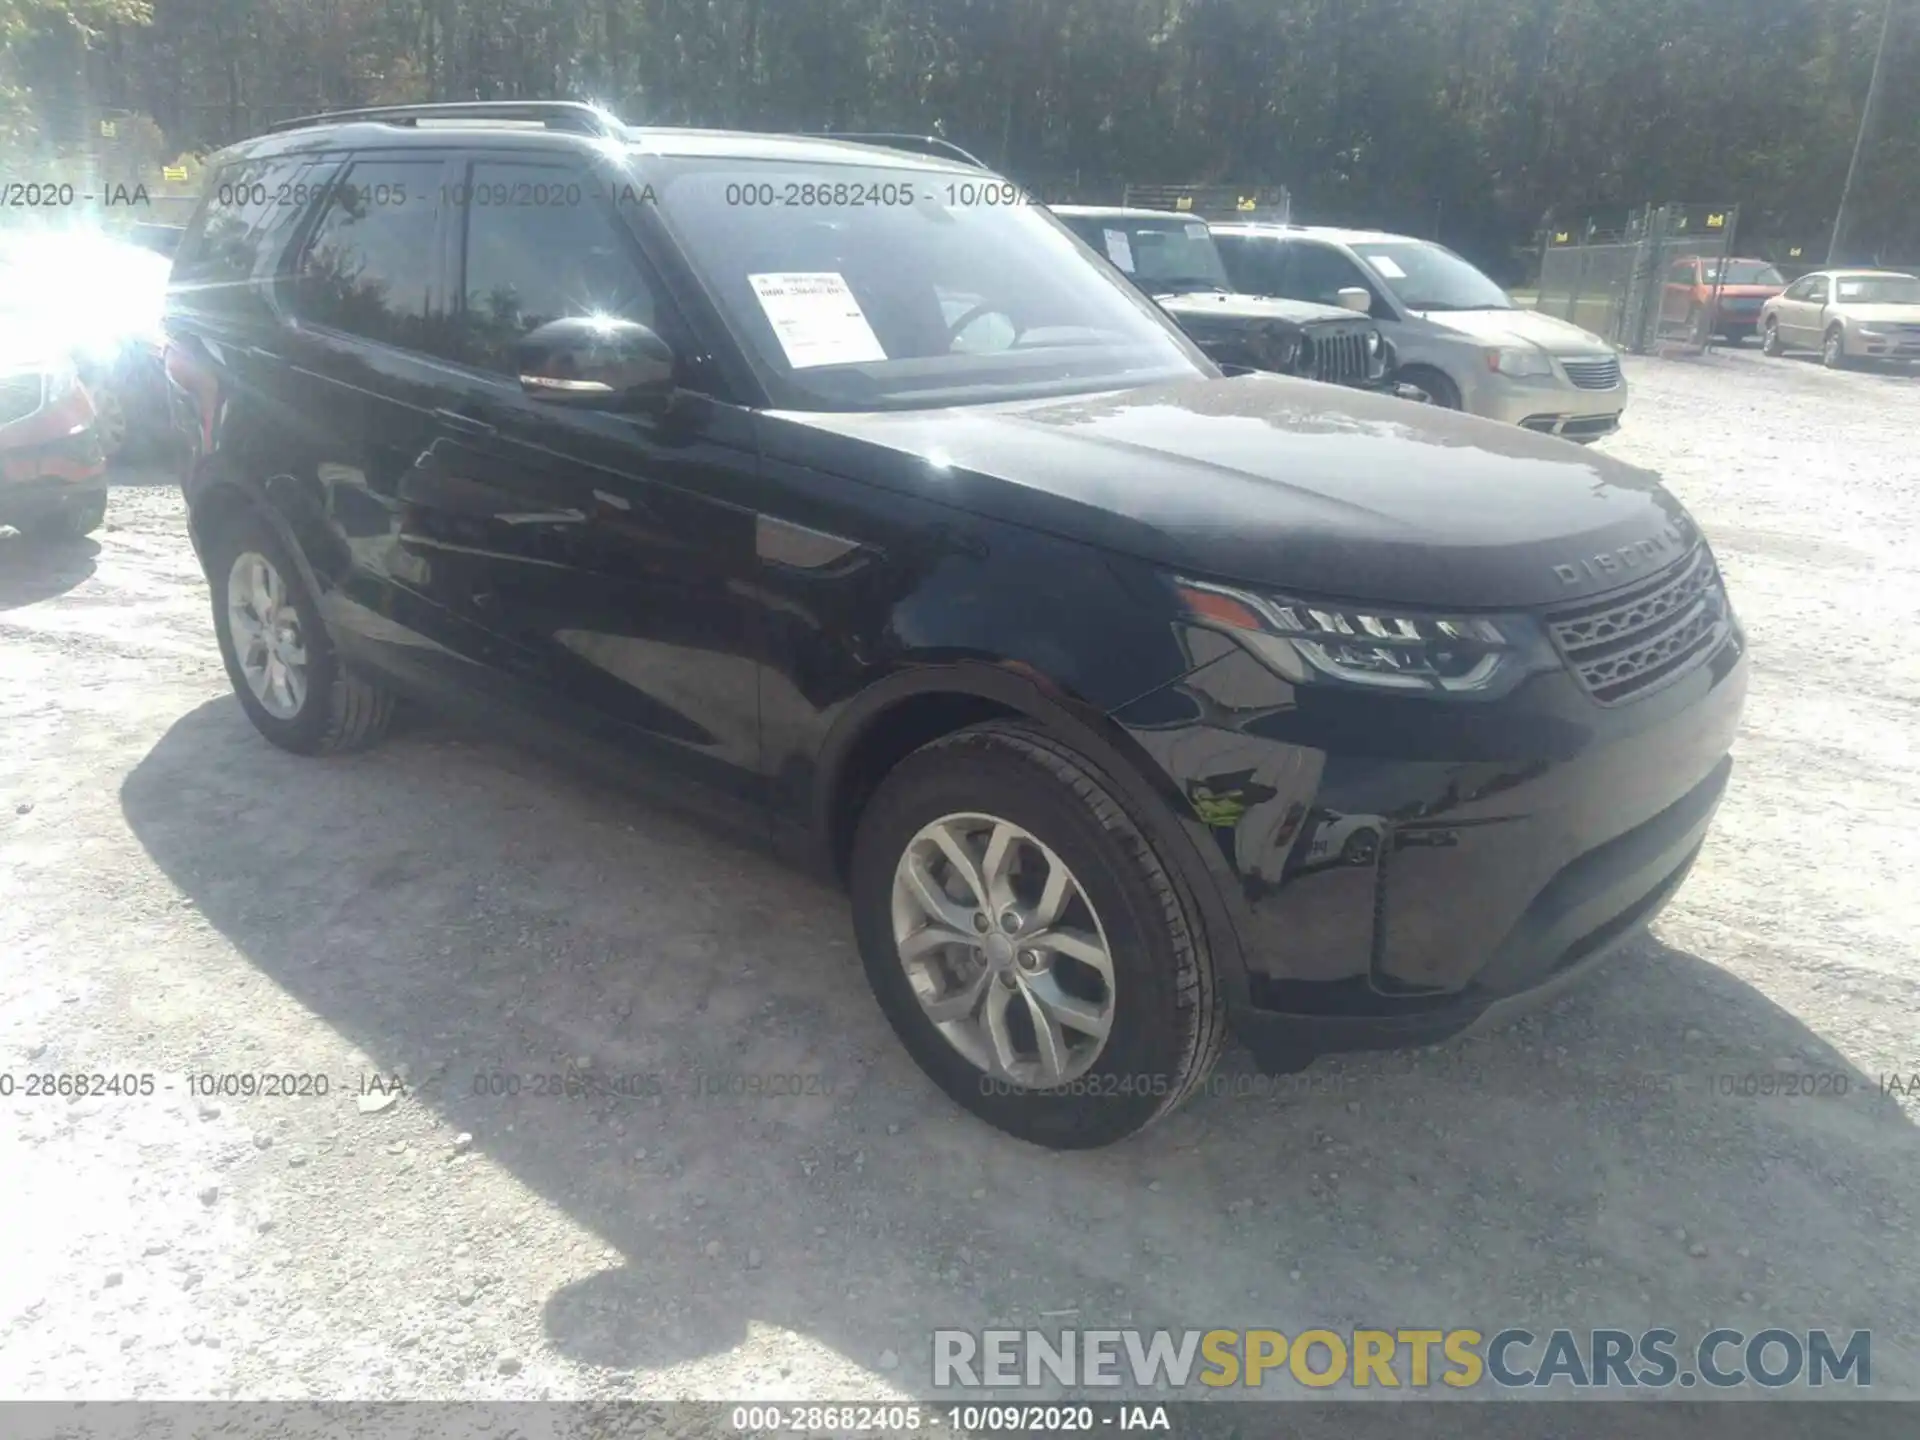 1 Photograph of a damaged car SALRG2RV1L2433289 LAND ROVER DISCOVERY 2020